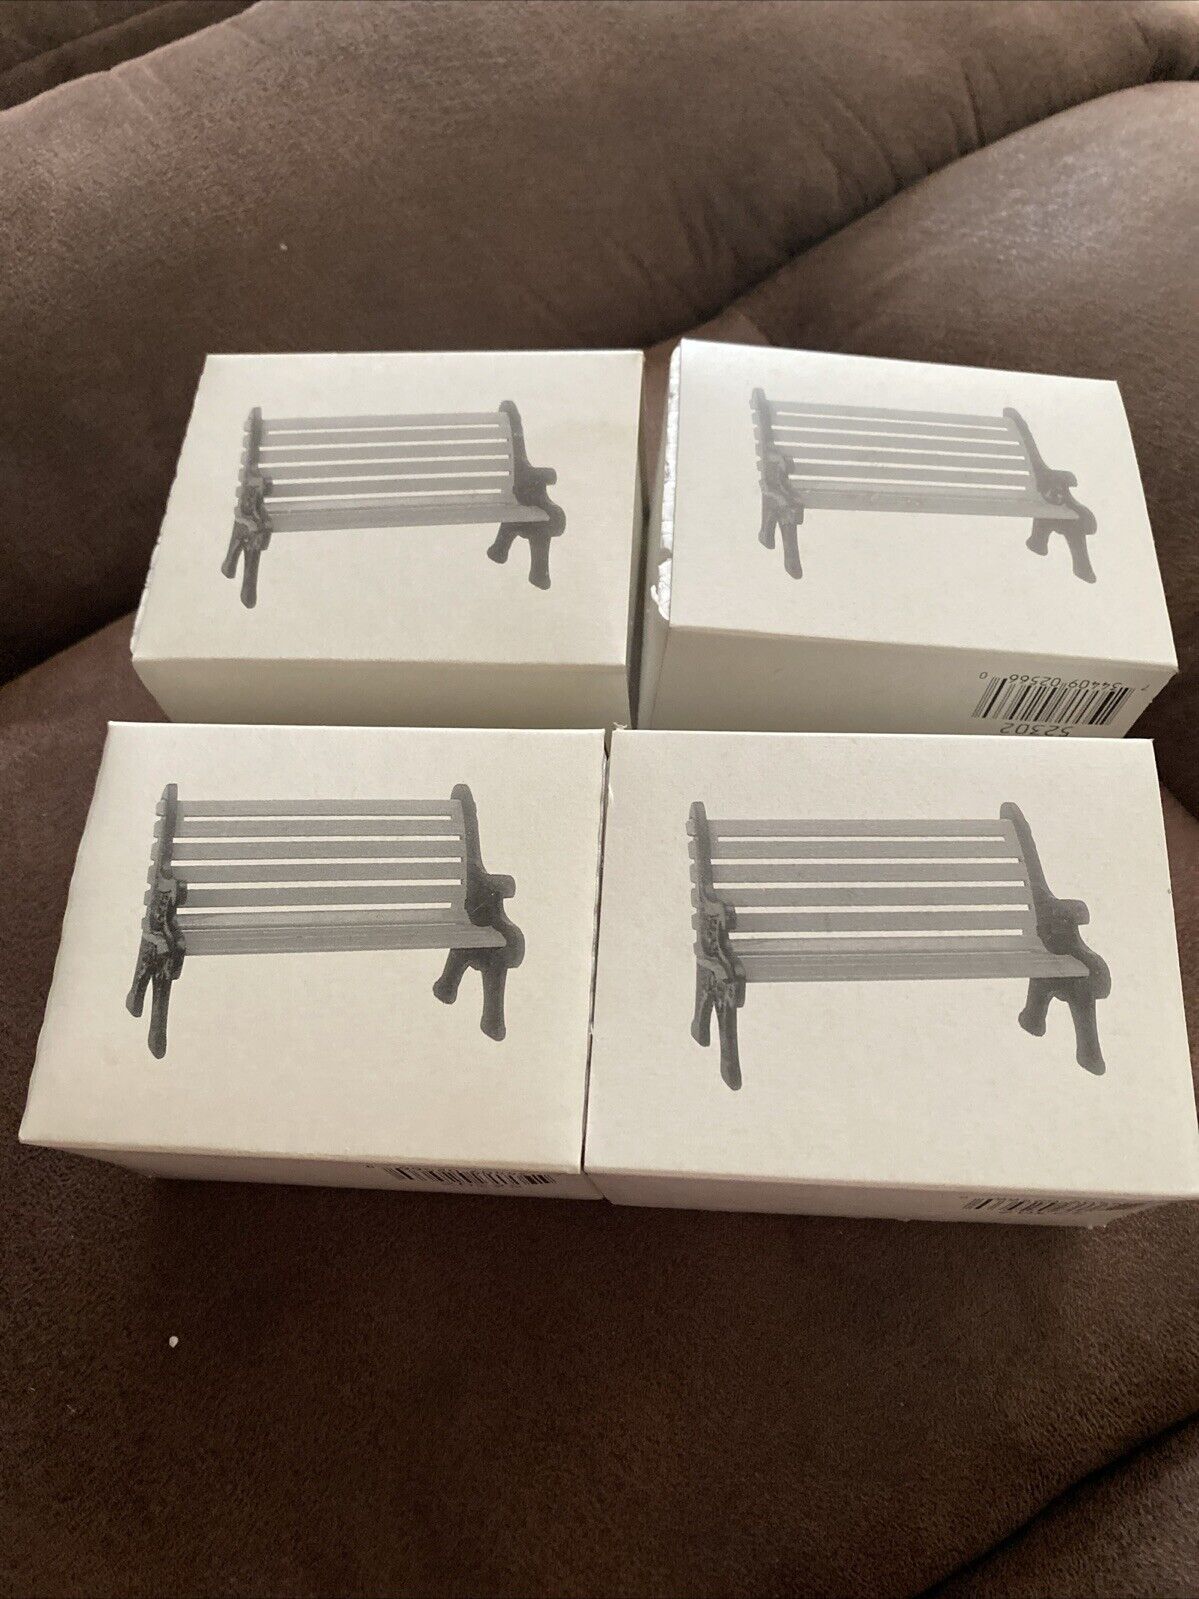 Dept 56 Lot of 4 Village Accessories Wrought Iron Park Bench  #52302 New